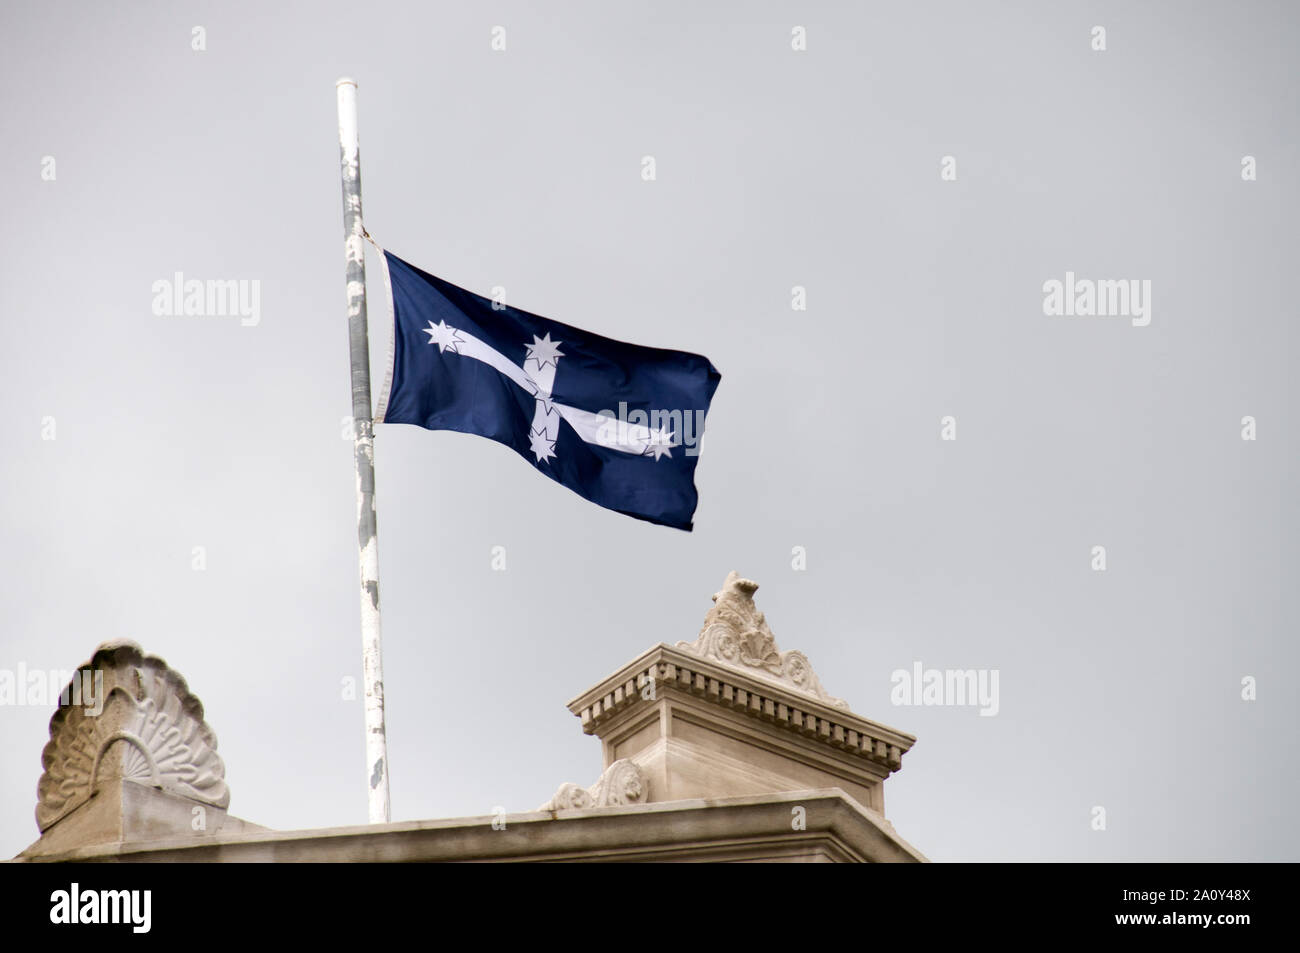 The Blue Eureka flag being flown above the town hall in Ballarat in the State of Victoria, Australia.    The Eureka flag was a War Flag used by the Eu Stock Photo